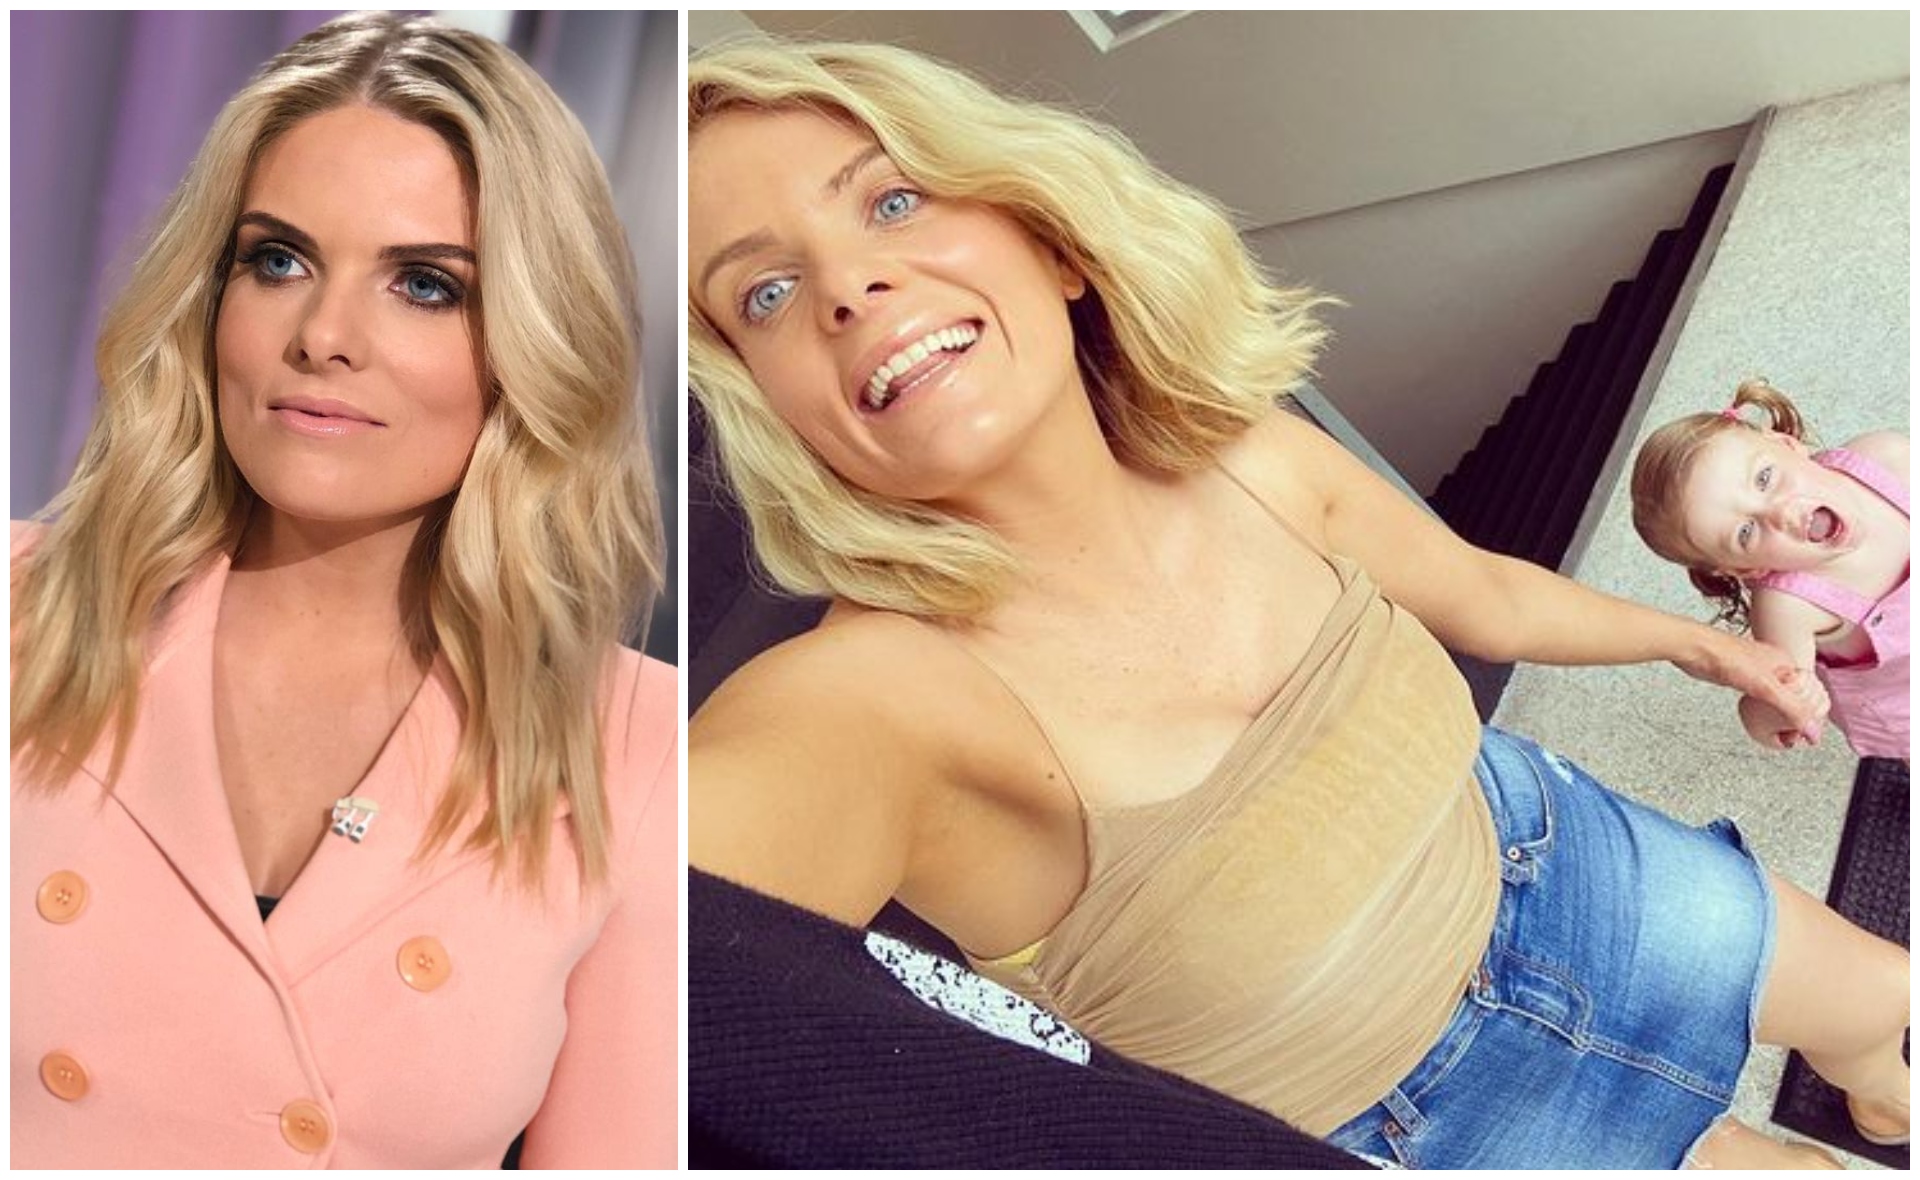 “I have to use my voice and use it for good – and I’ve got a platform to do that”: Erin Molan on how she brings herself, her daughter and her female followers up